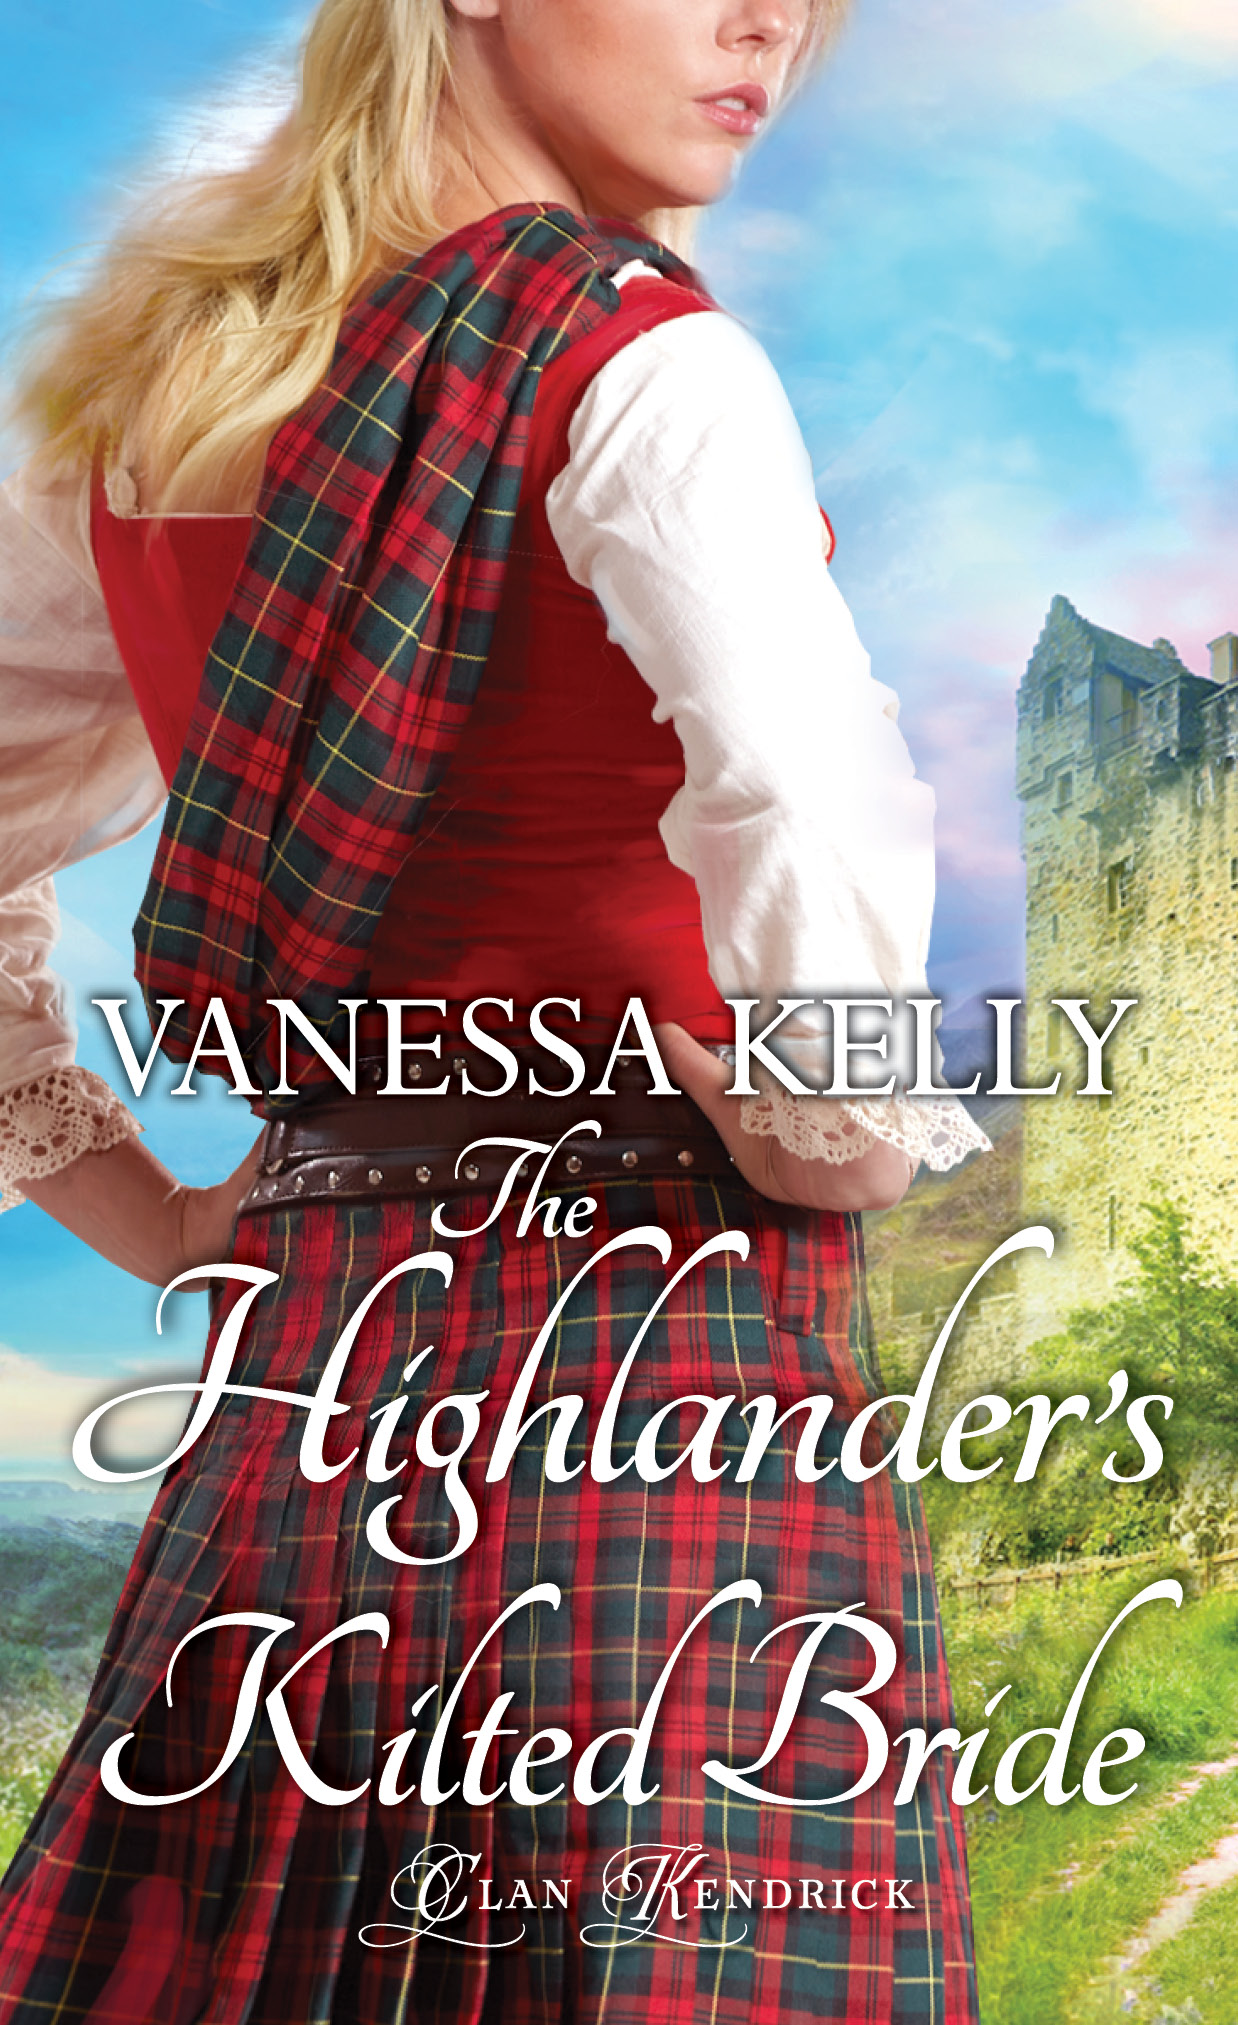 cover art for The Highlander's Kilted Bride featuring a blonde-haired woman in a kilt